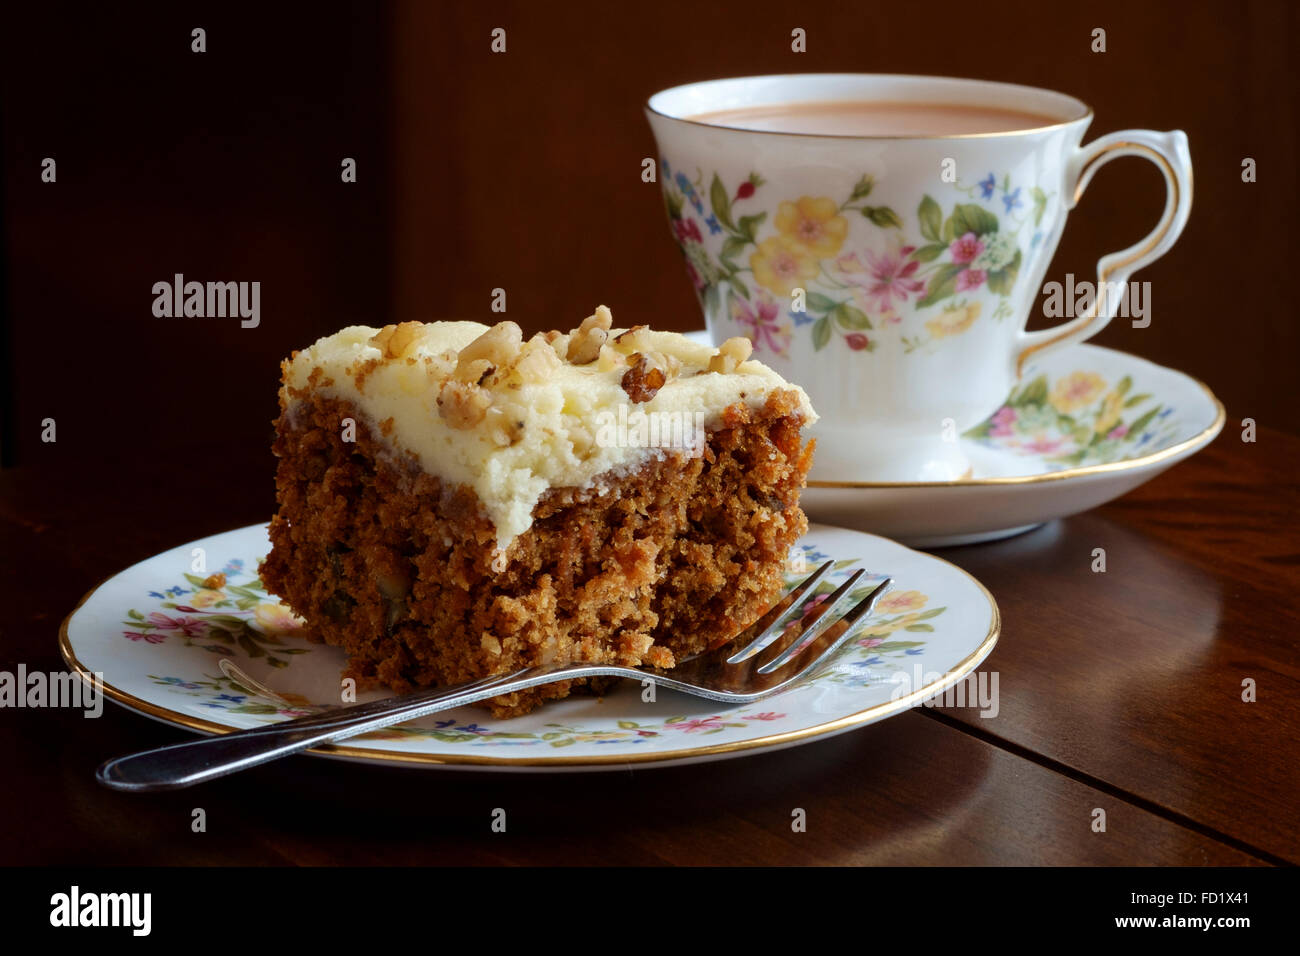 Tea cup and saucer with slice of carrot cake on matching china plate Stock Photo